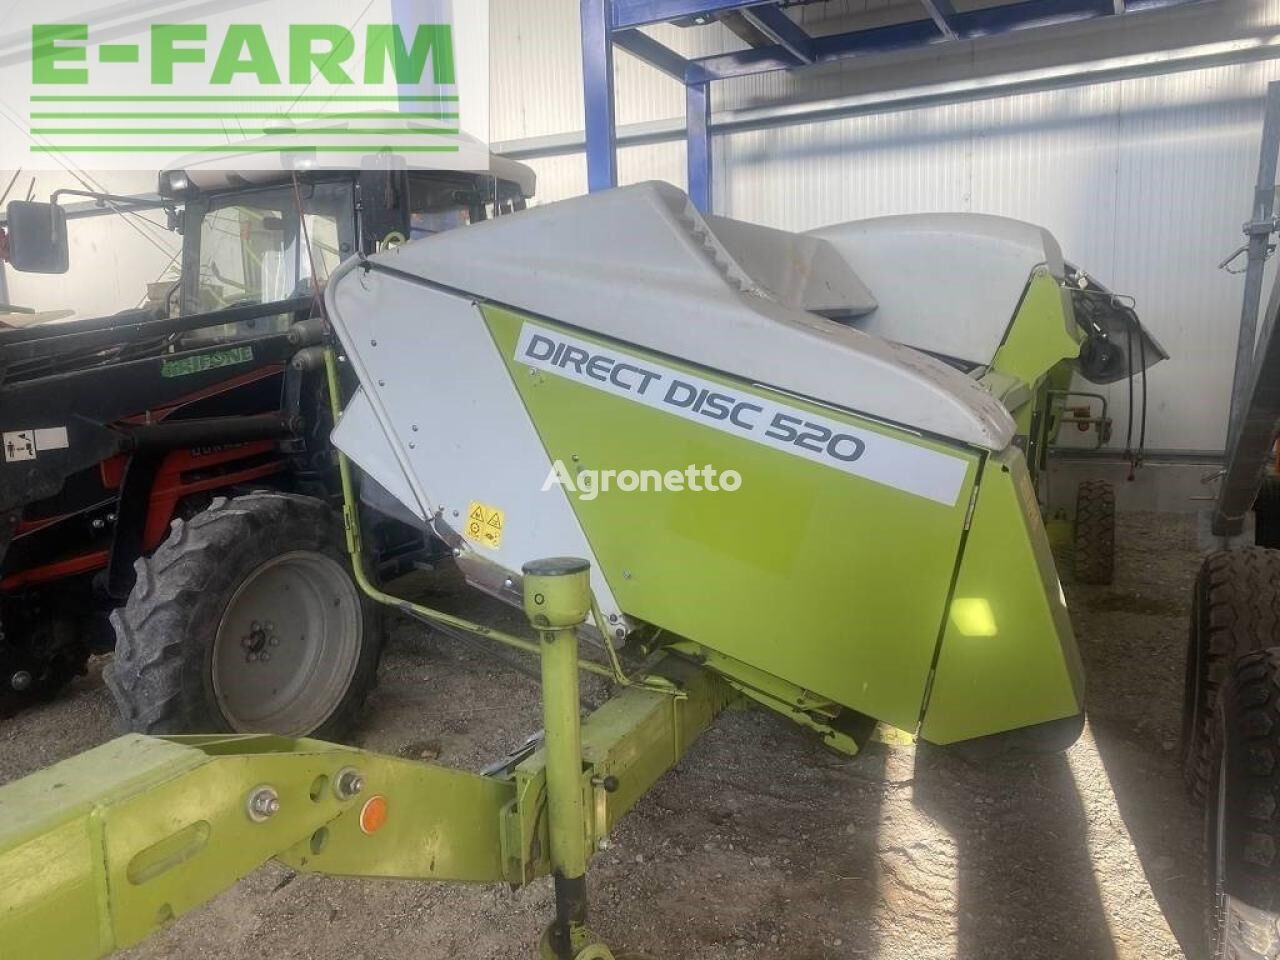 Claas direct disc 520 typ 492 contour graudu heders